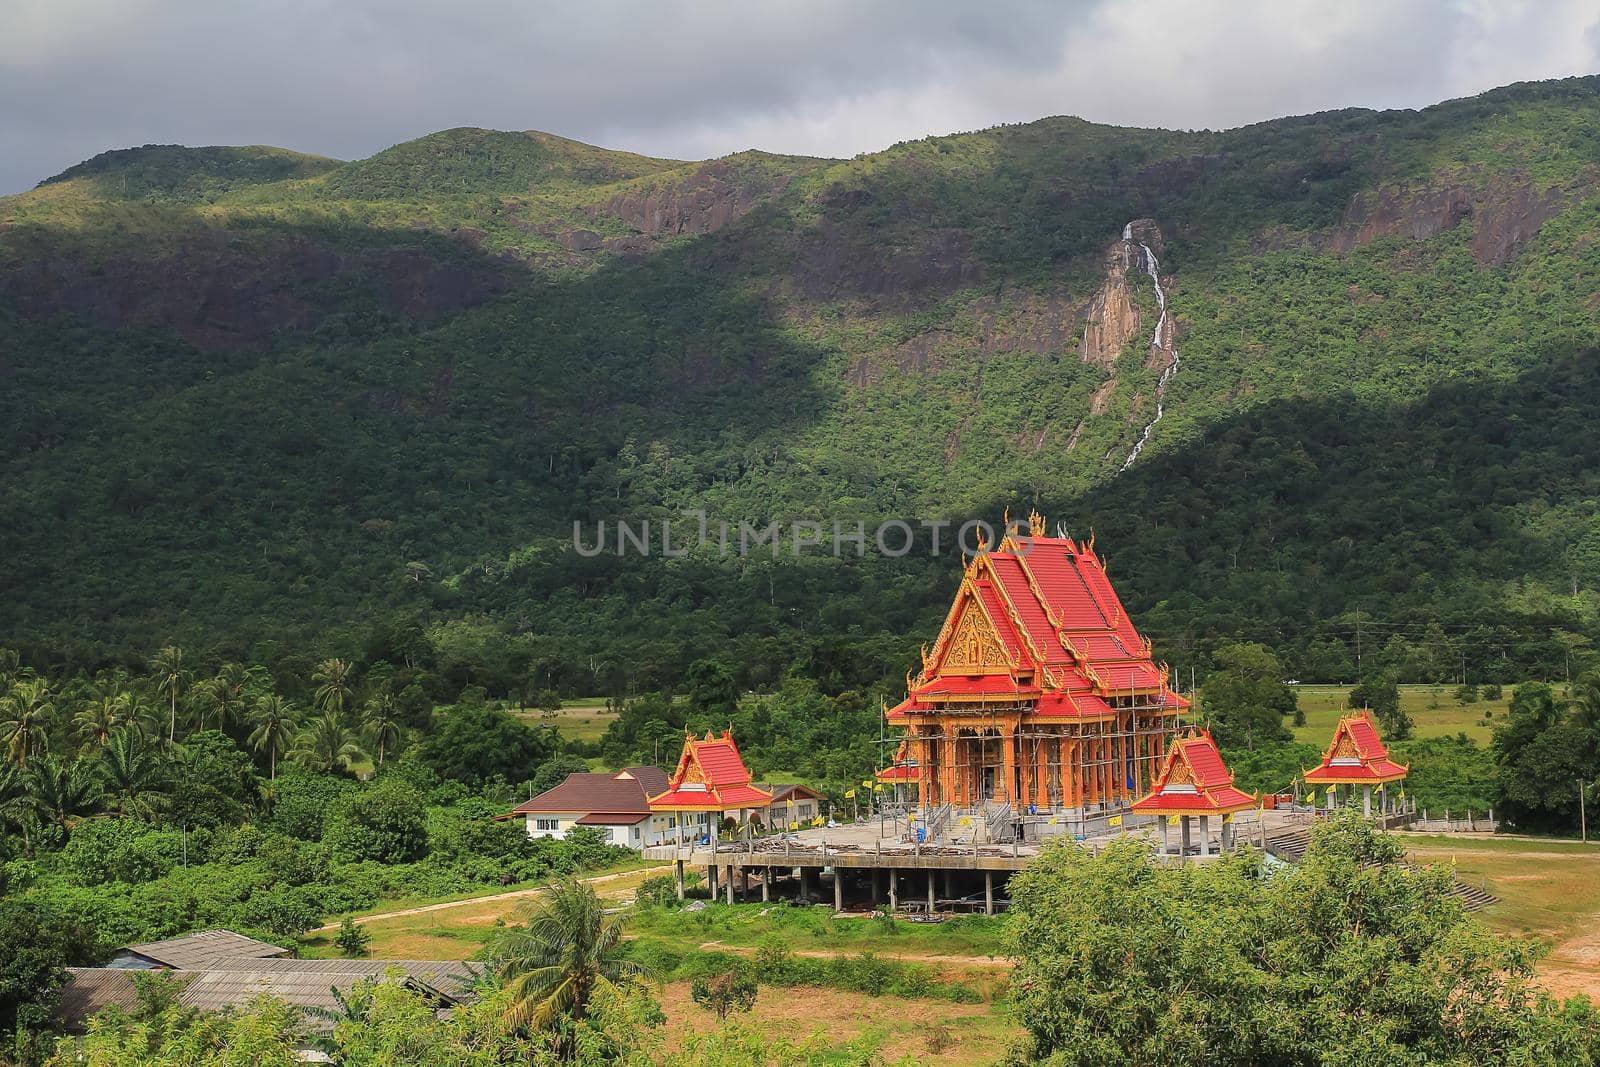 Thai temple at the mountain in thailand